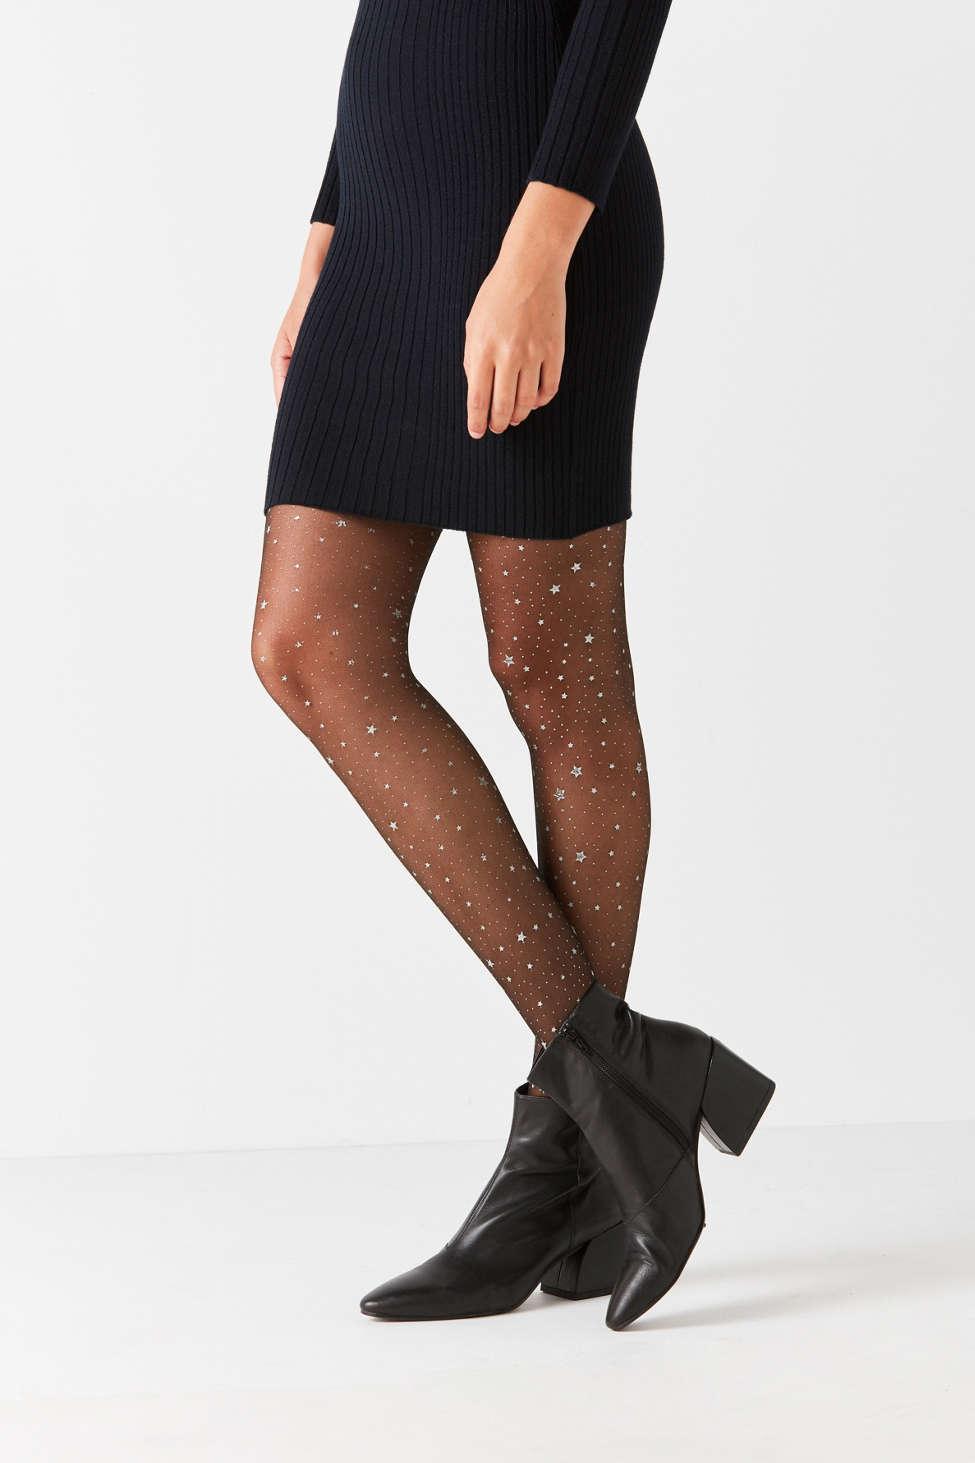 abdalla mohamed ahmed recommends how to make glitter tights pic